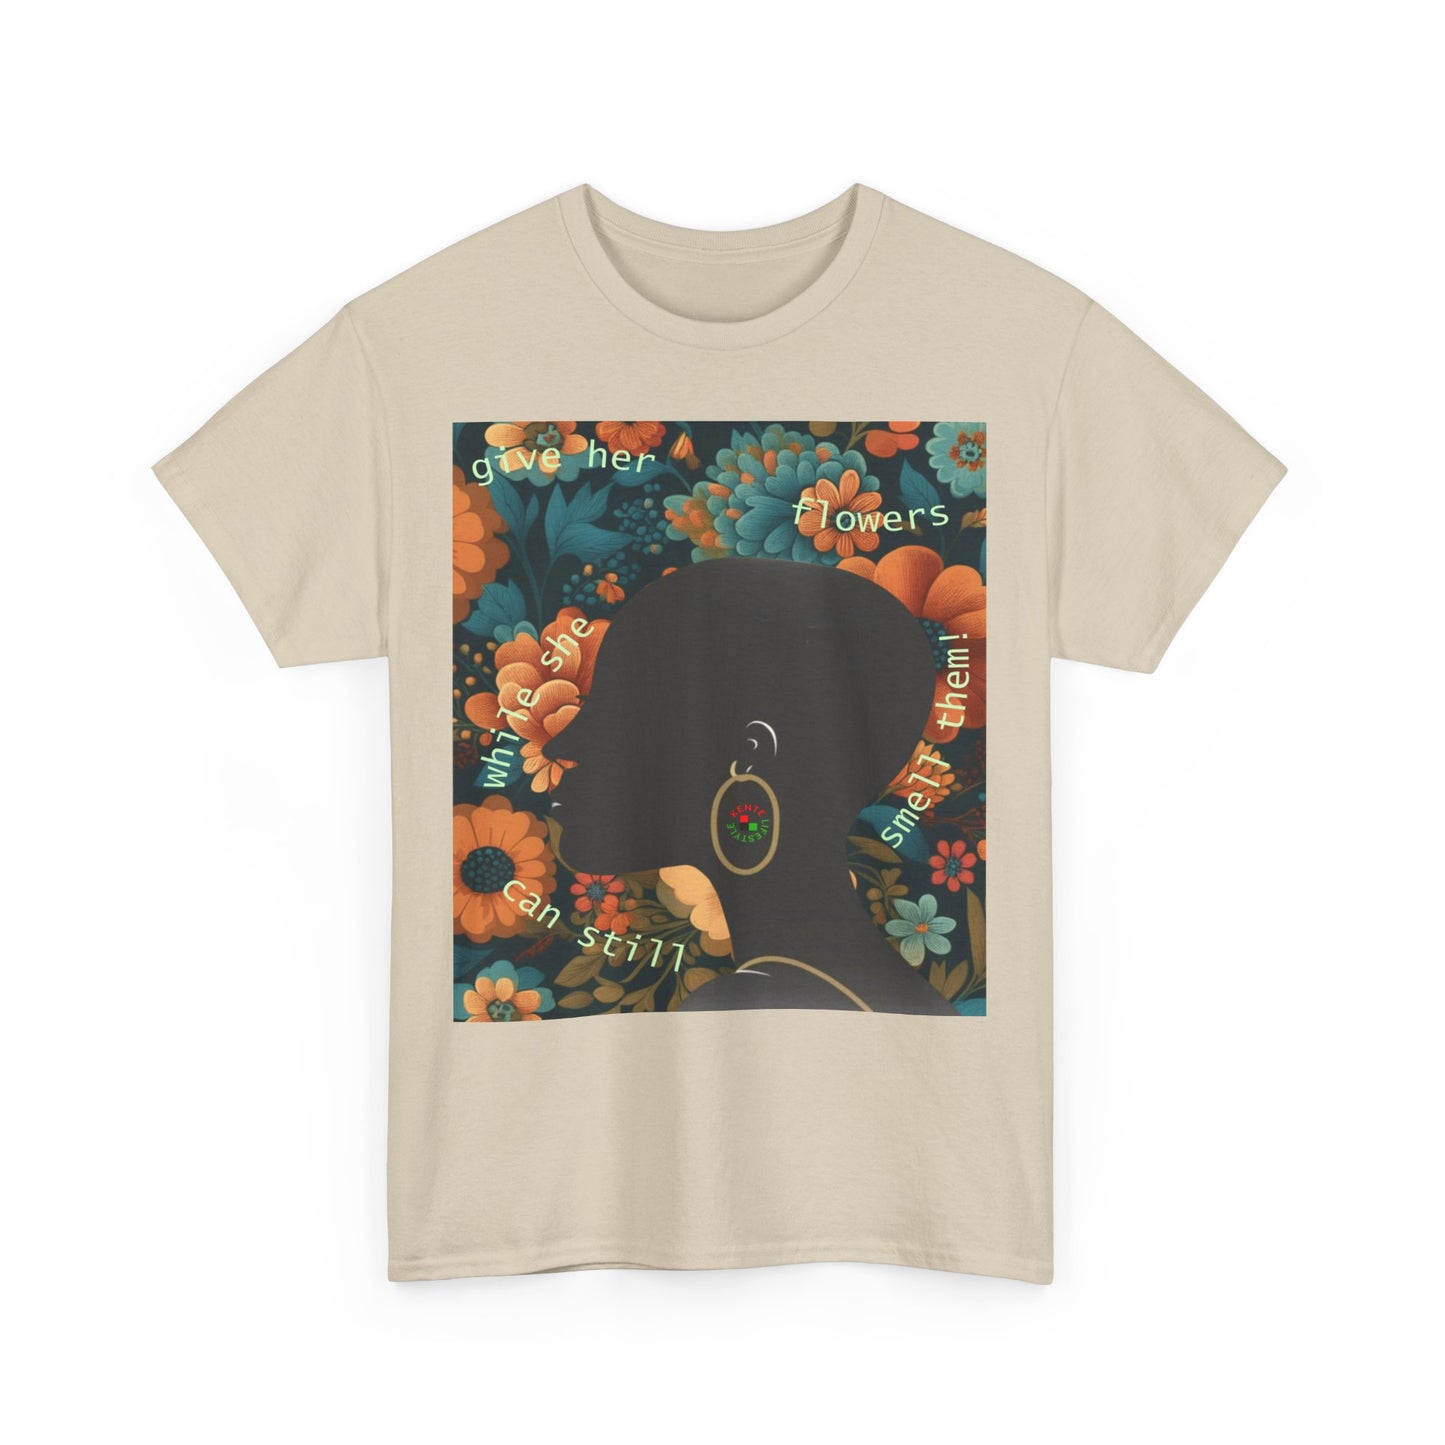 Give her flowers..." T-shirt